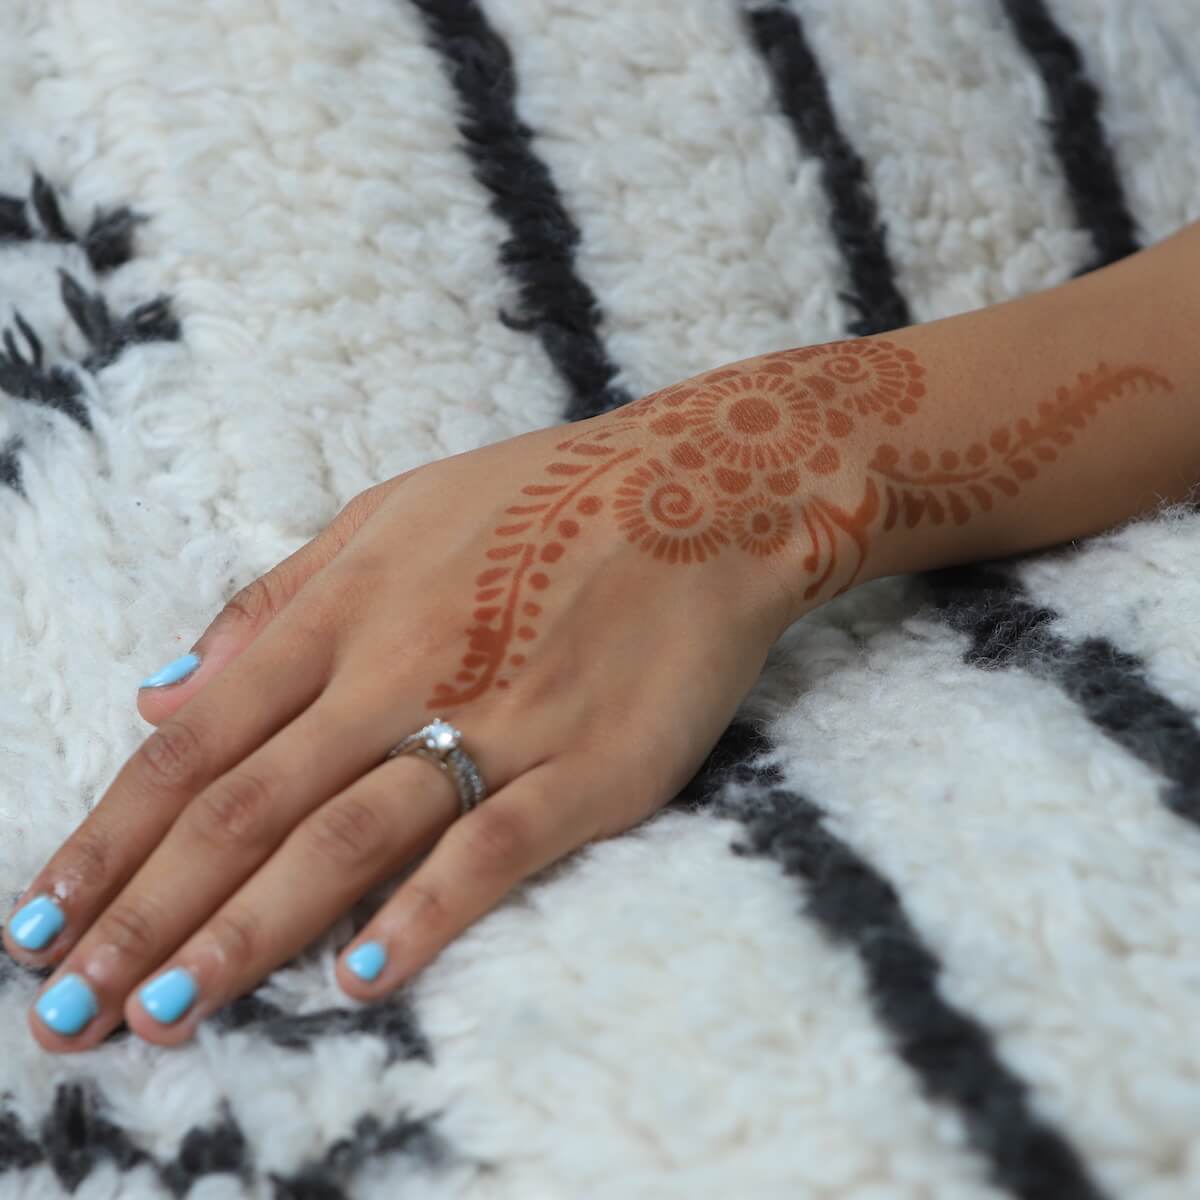 TRIBAL HENNA on Tumblr: Image tagged with Henna, Tribal henna, Tribalhenna